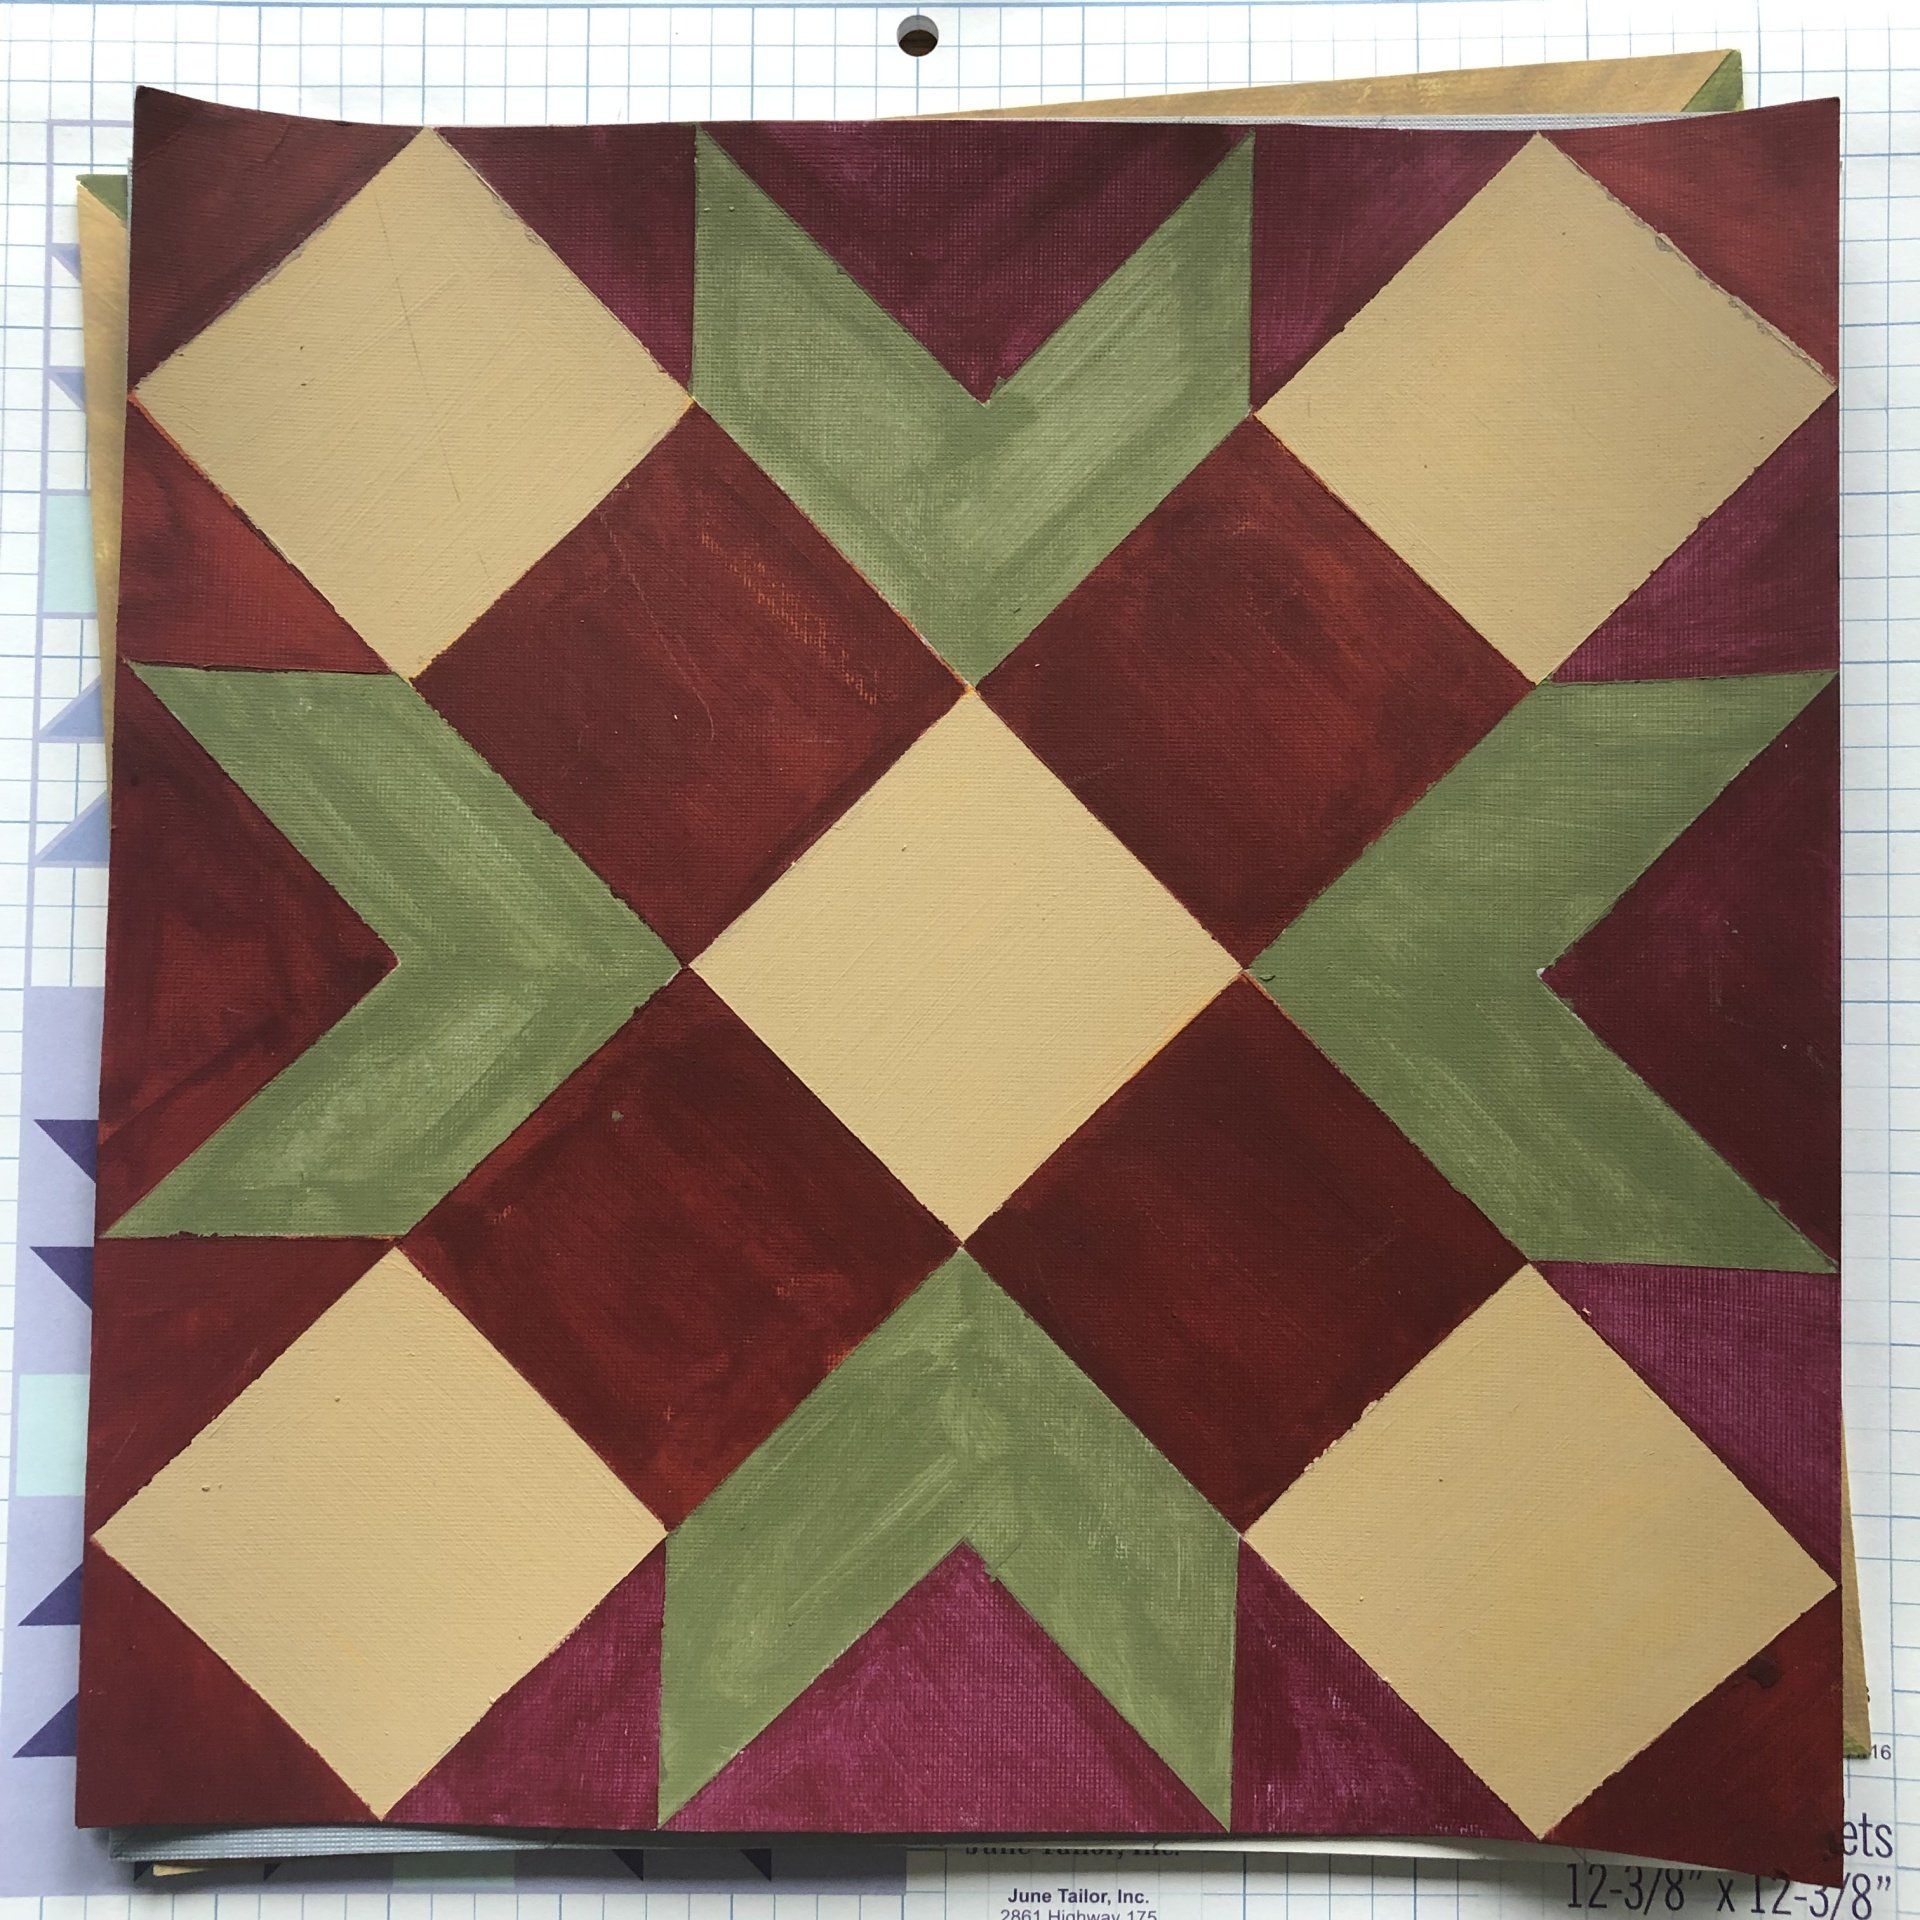 A painted rendering of a barn quilt design.